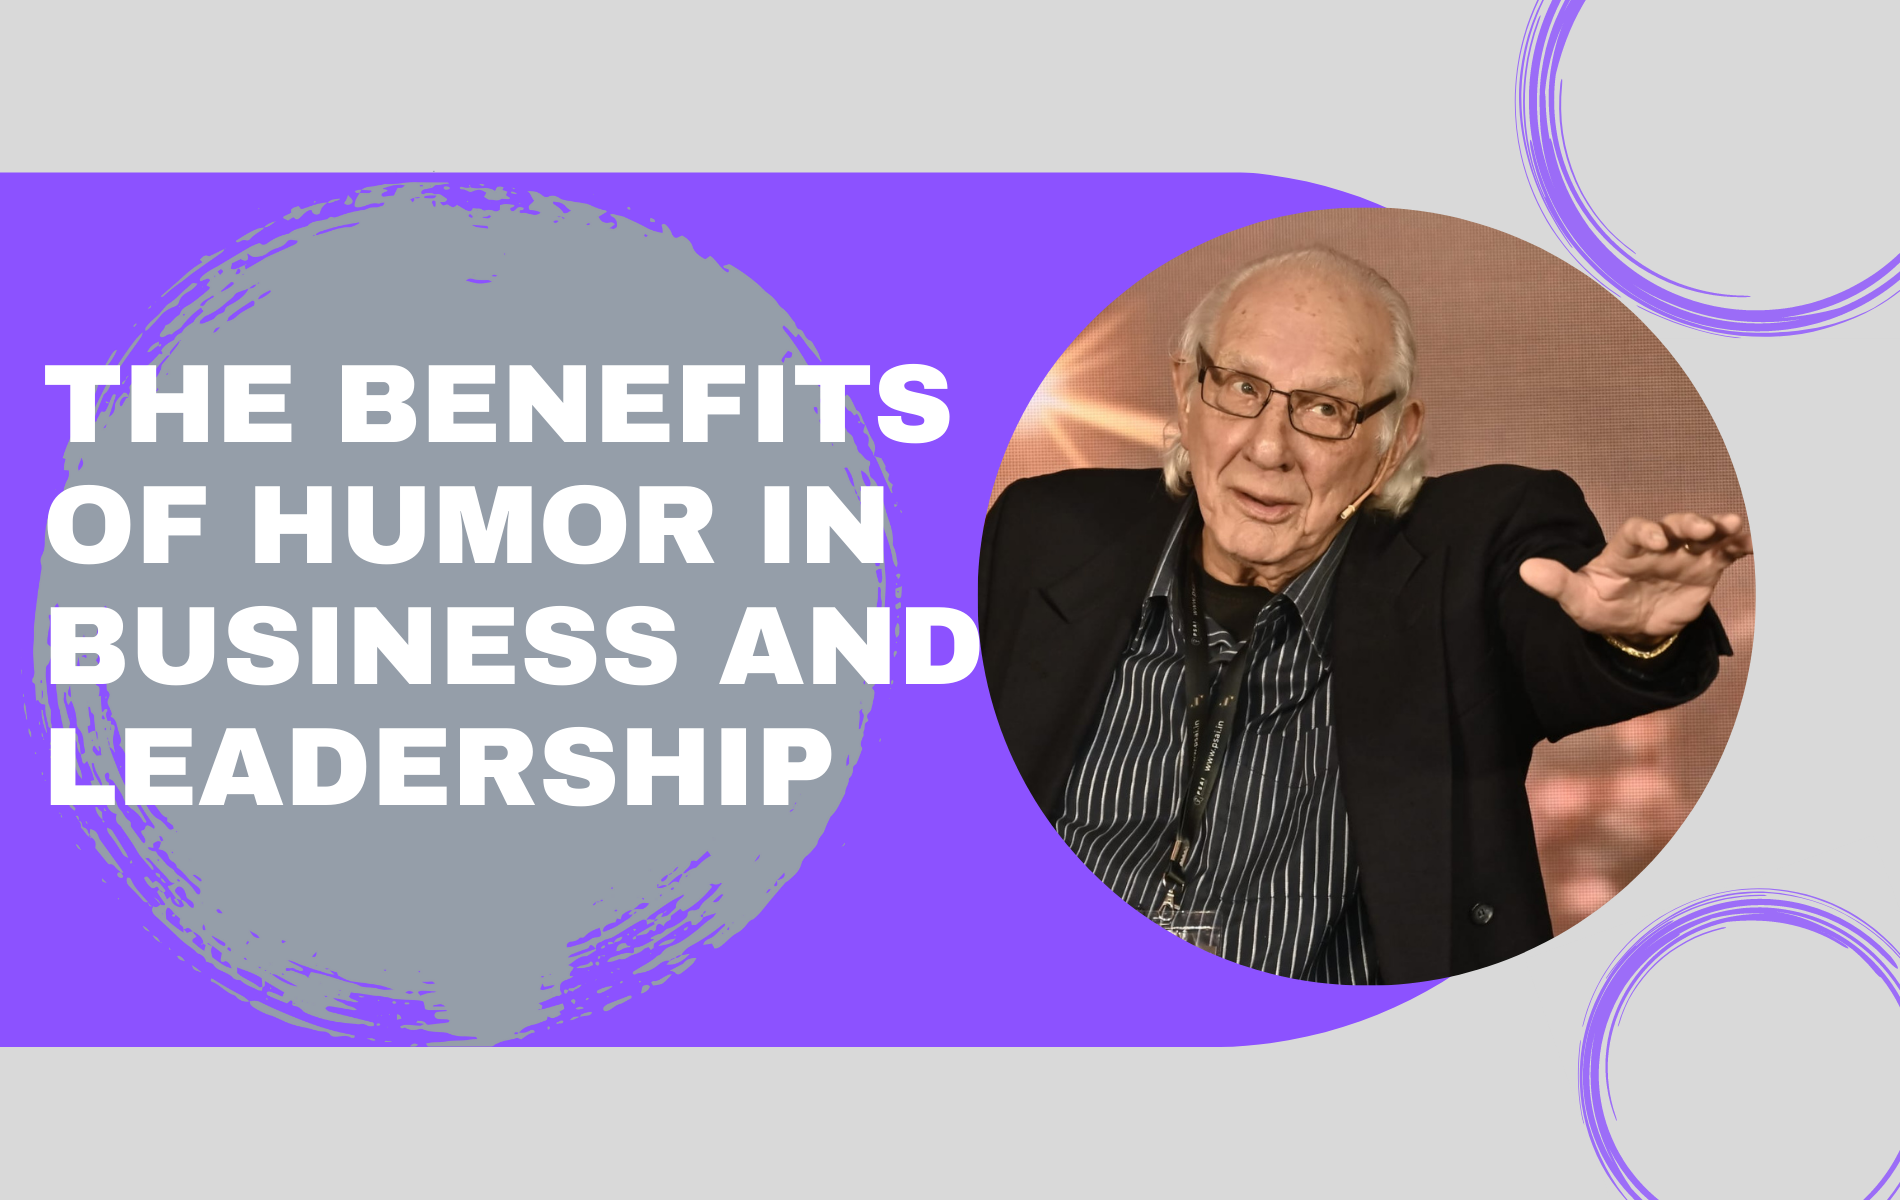 The Benefits of Humor in Business and Leadership